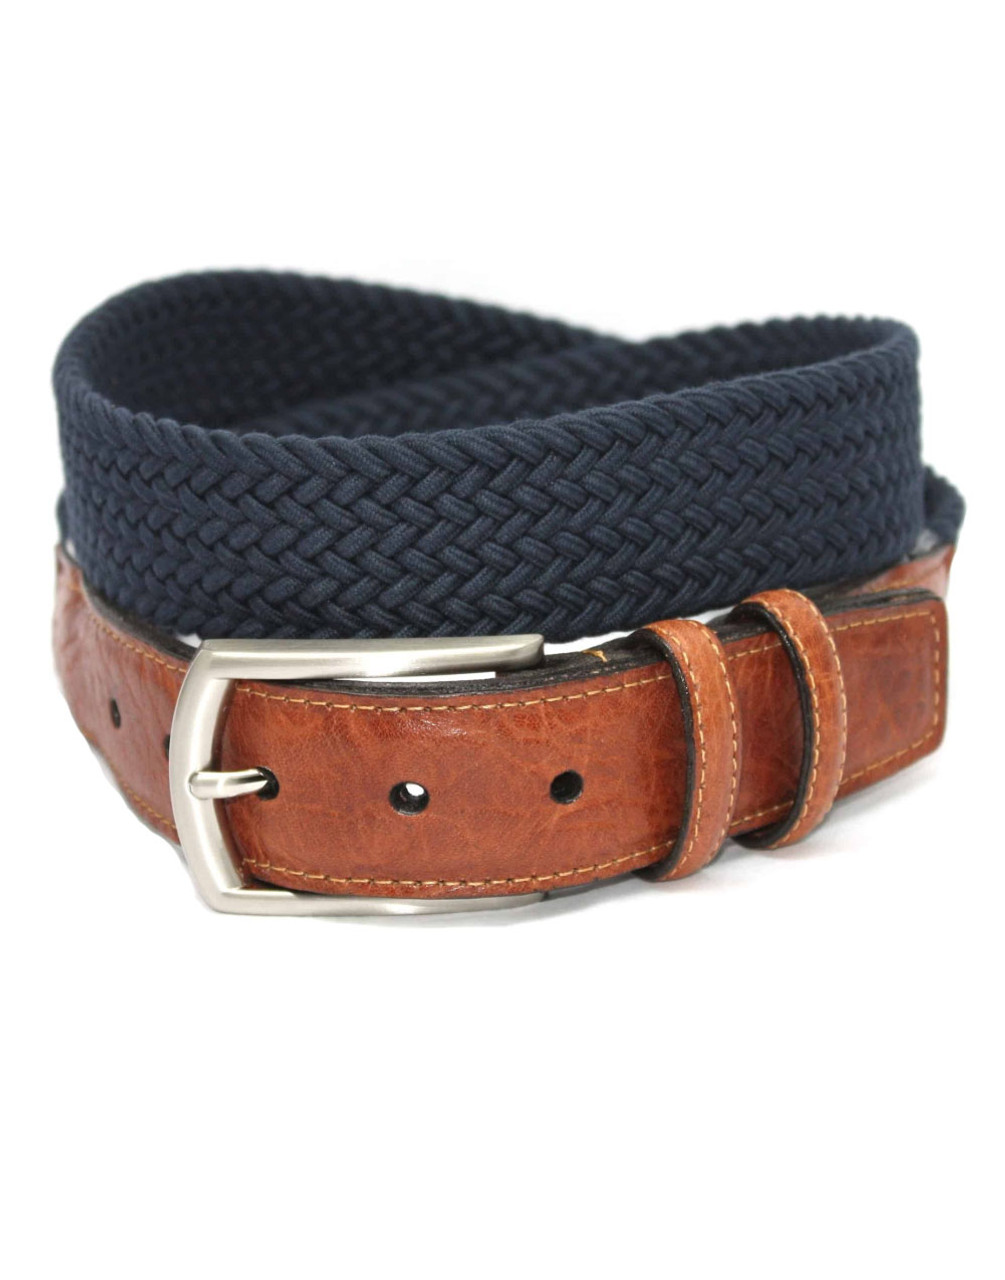 Italian Woven Cotton & Leather Belt in Navy/Brown by Torino